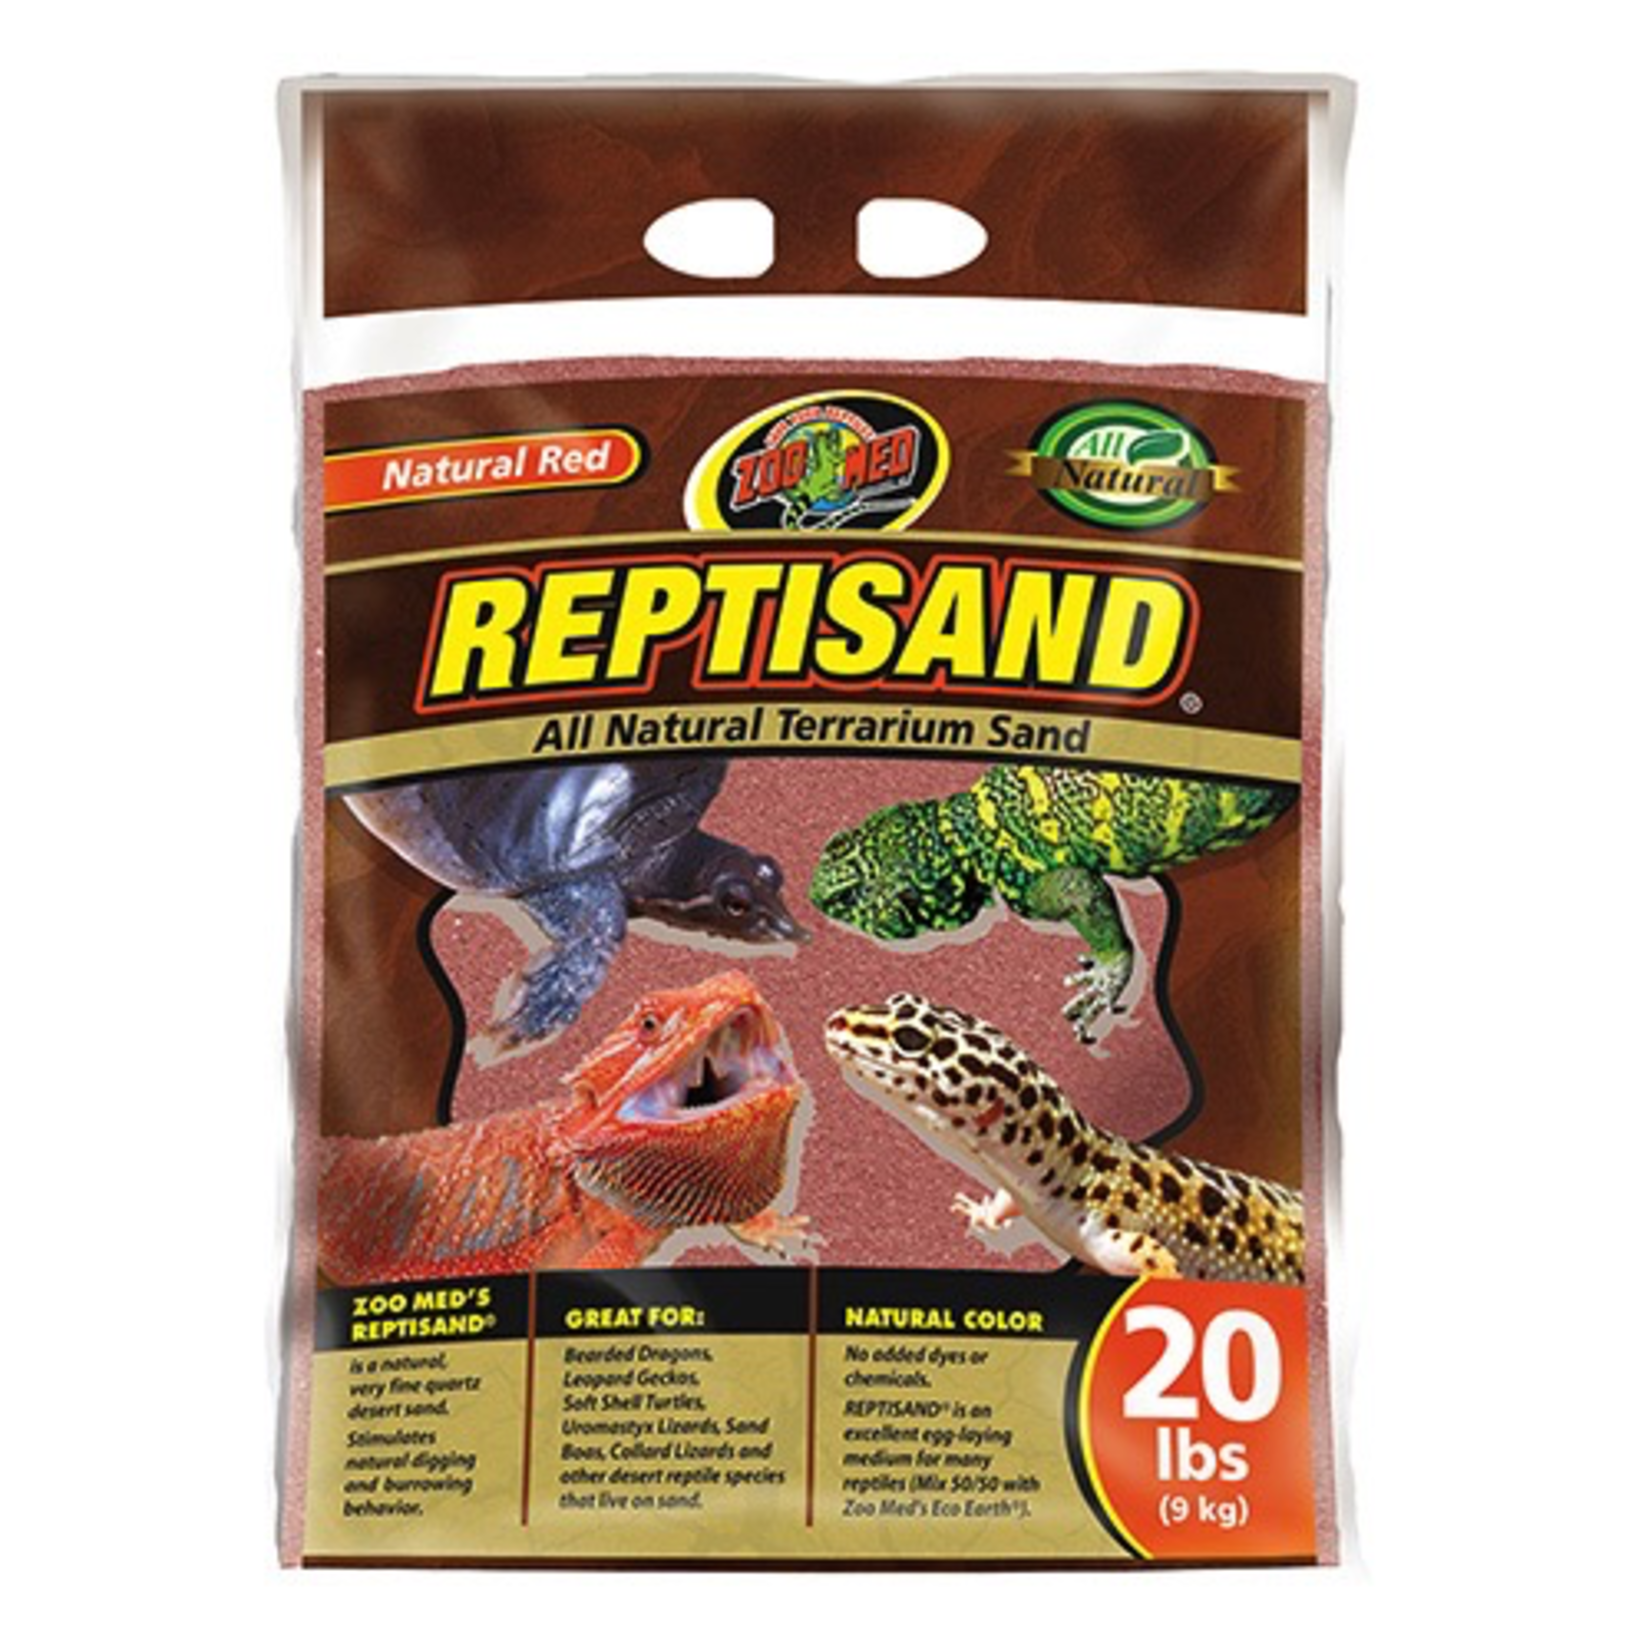 (W) ReptiSand - Natural Red - 20 lb